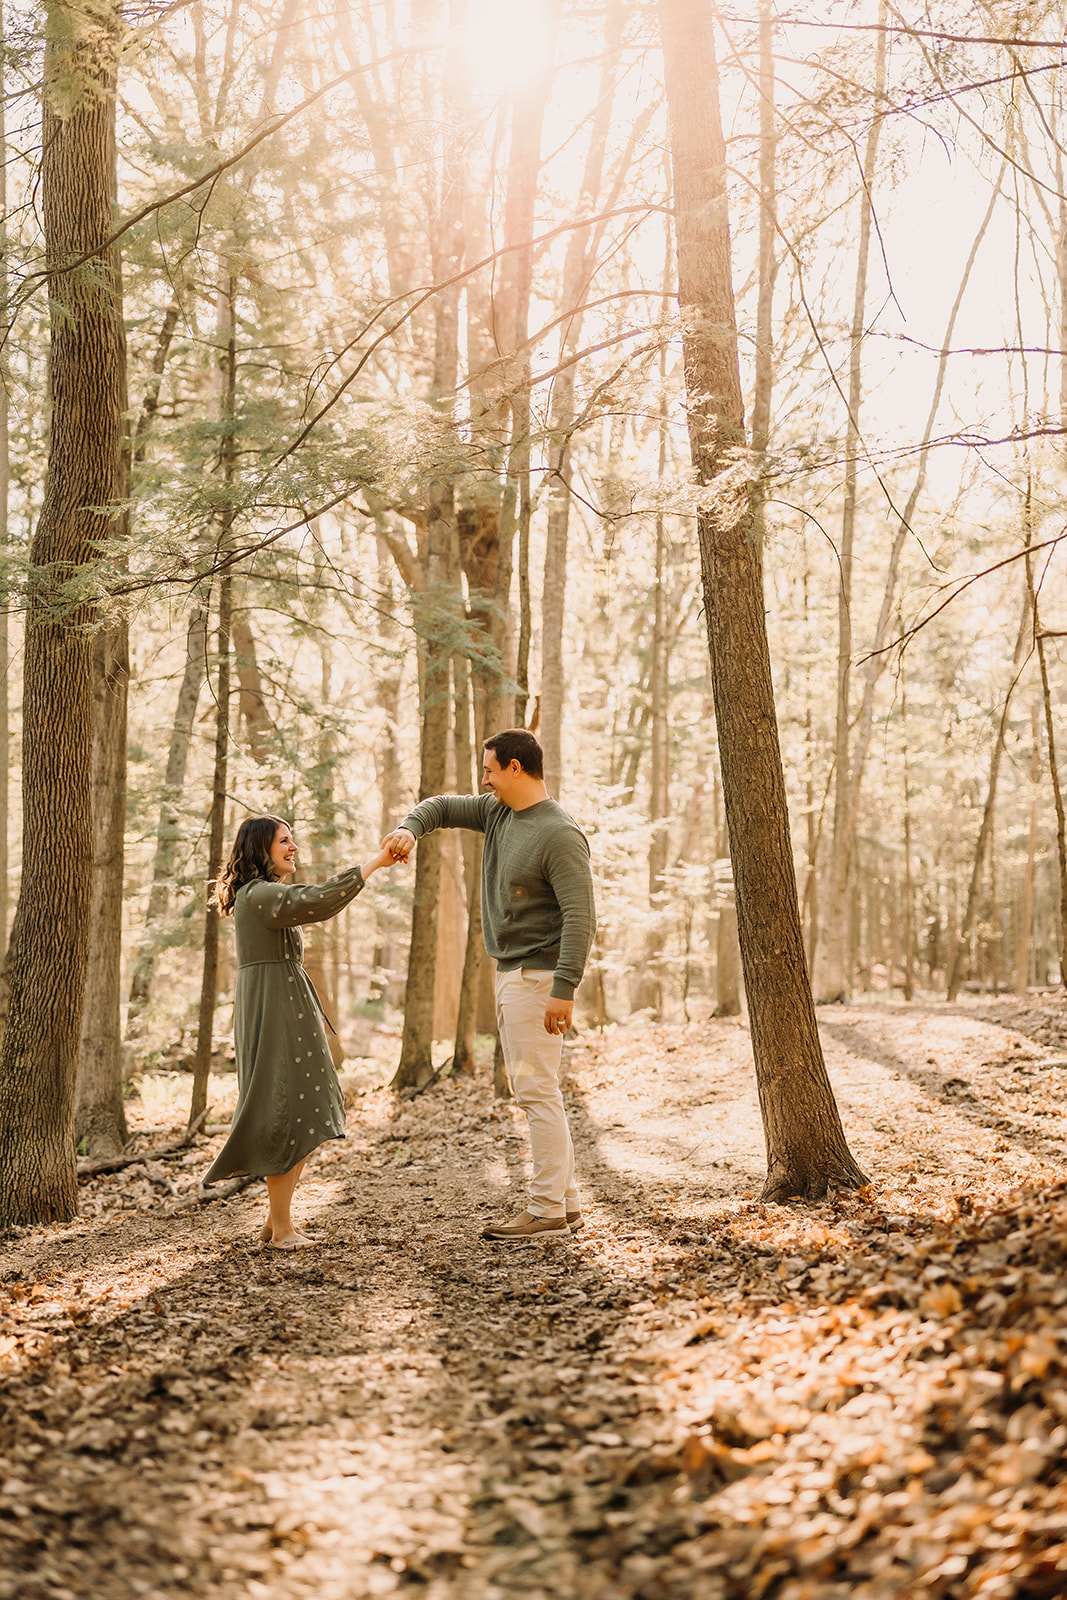 Serene outdoor backdrop for a heartfelt family photoshoot with husband and wife